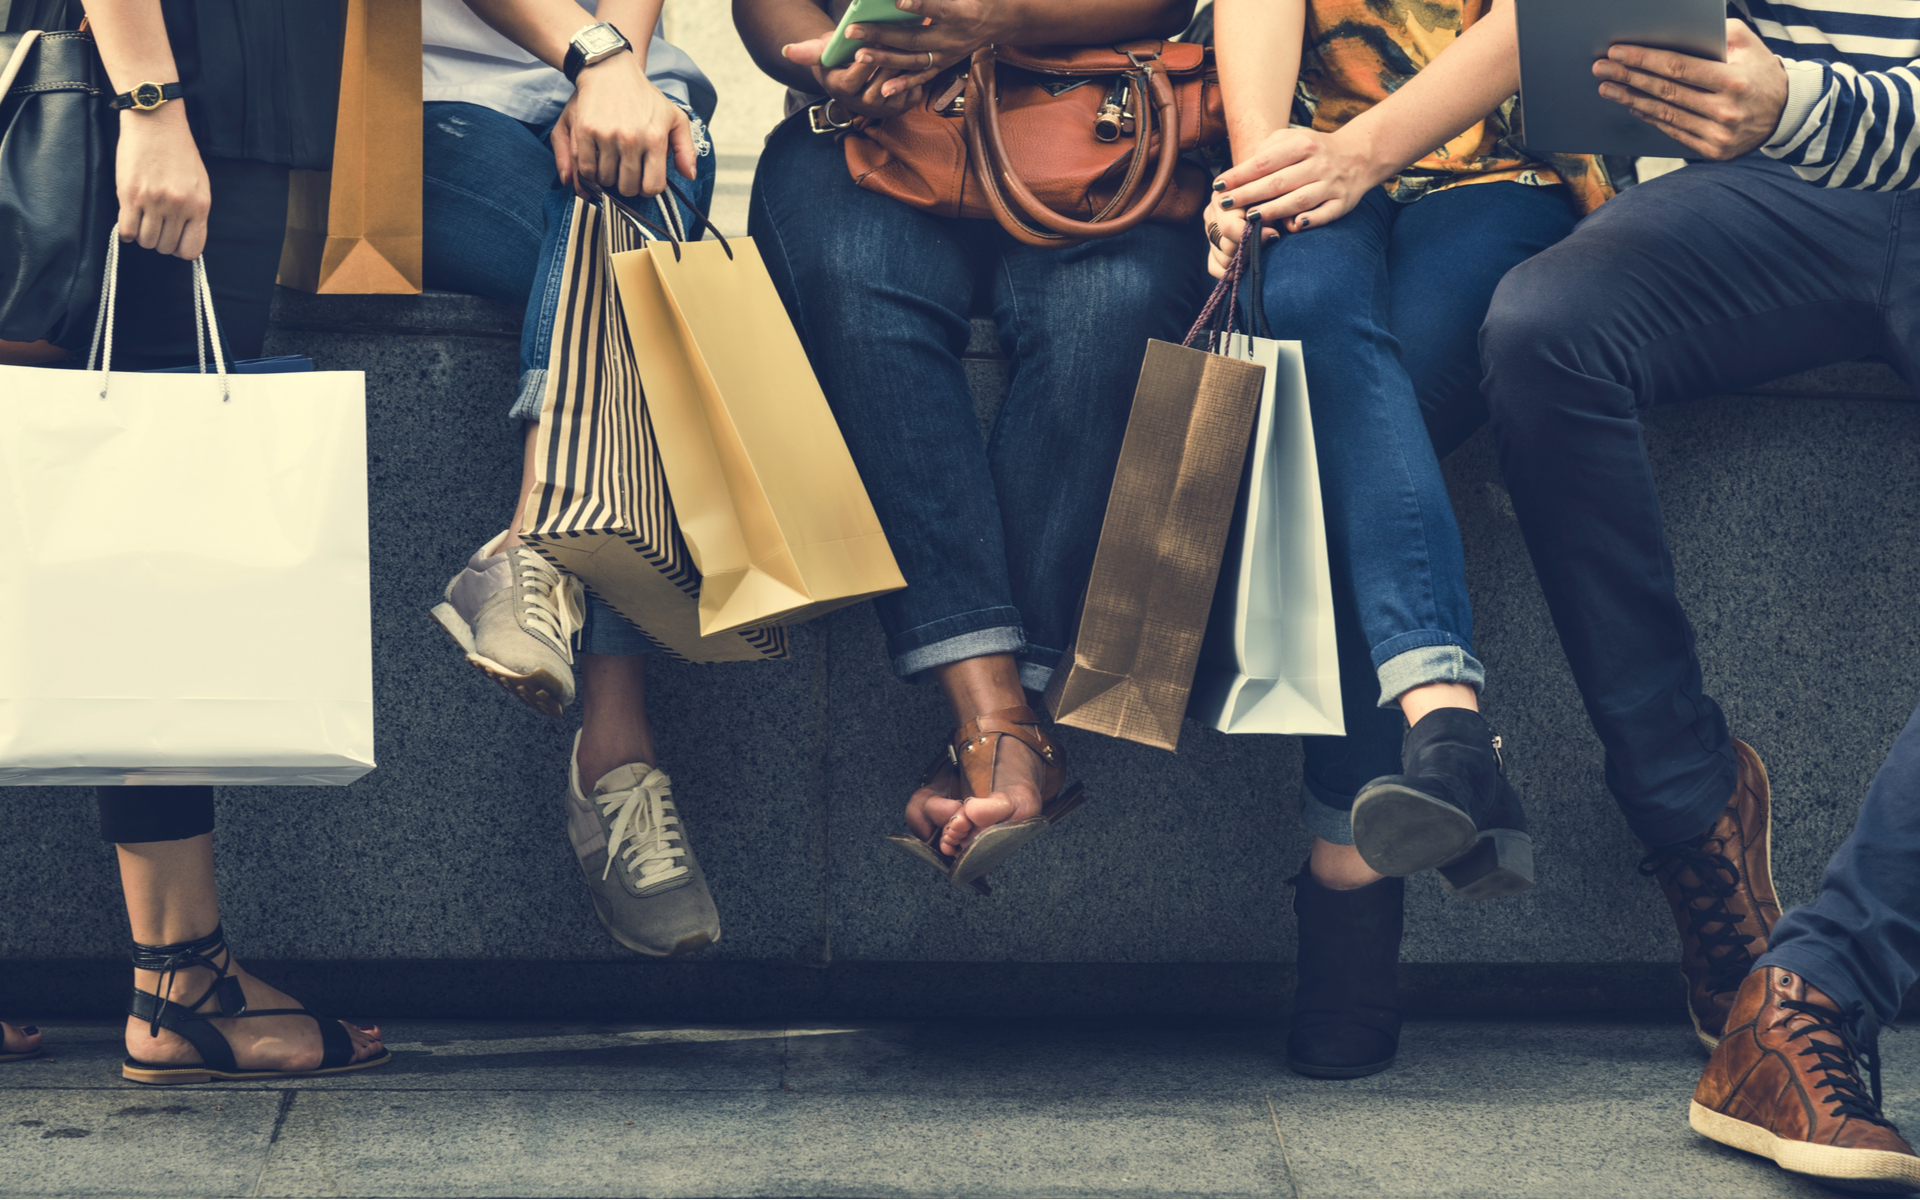 Earning Bitcoin While You Buy Goods is the ‘New Shopping Experience’